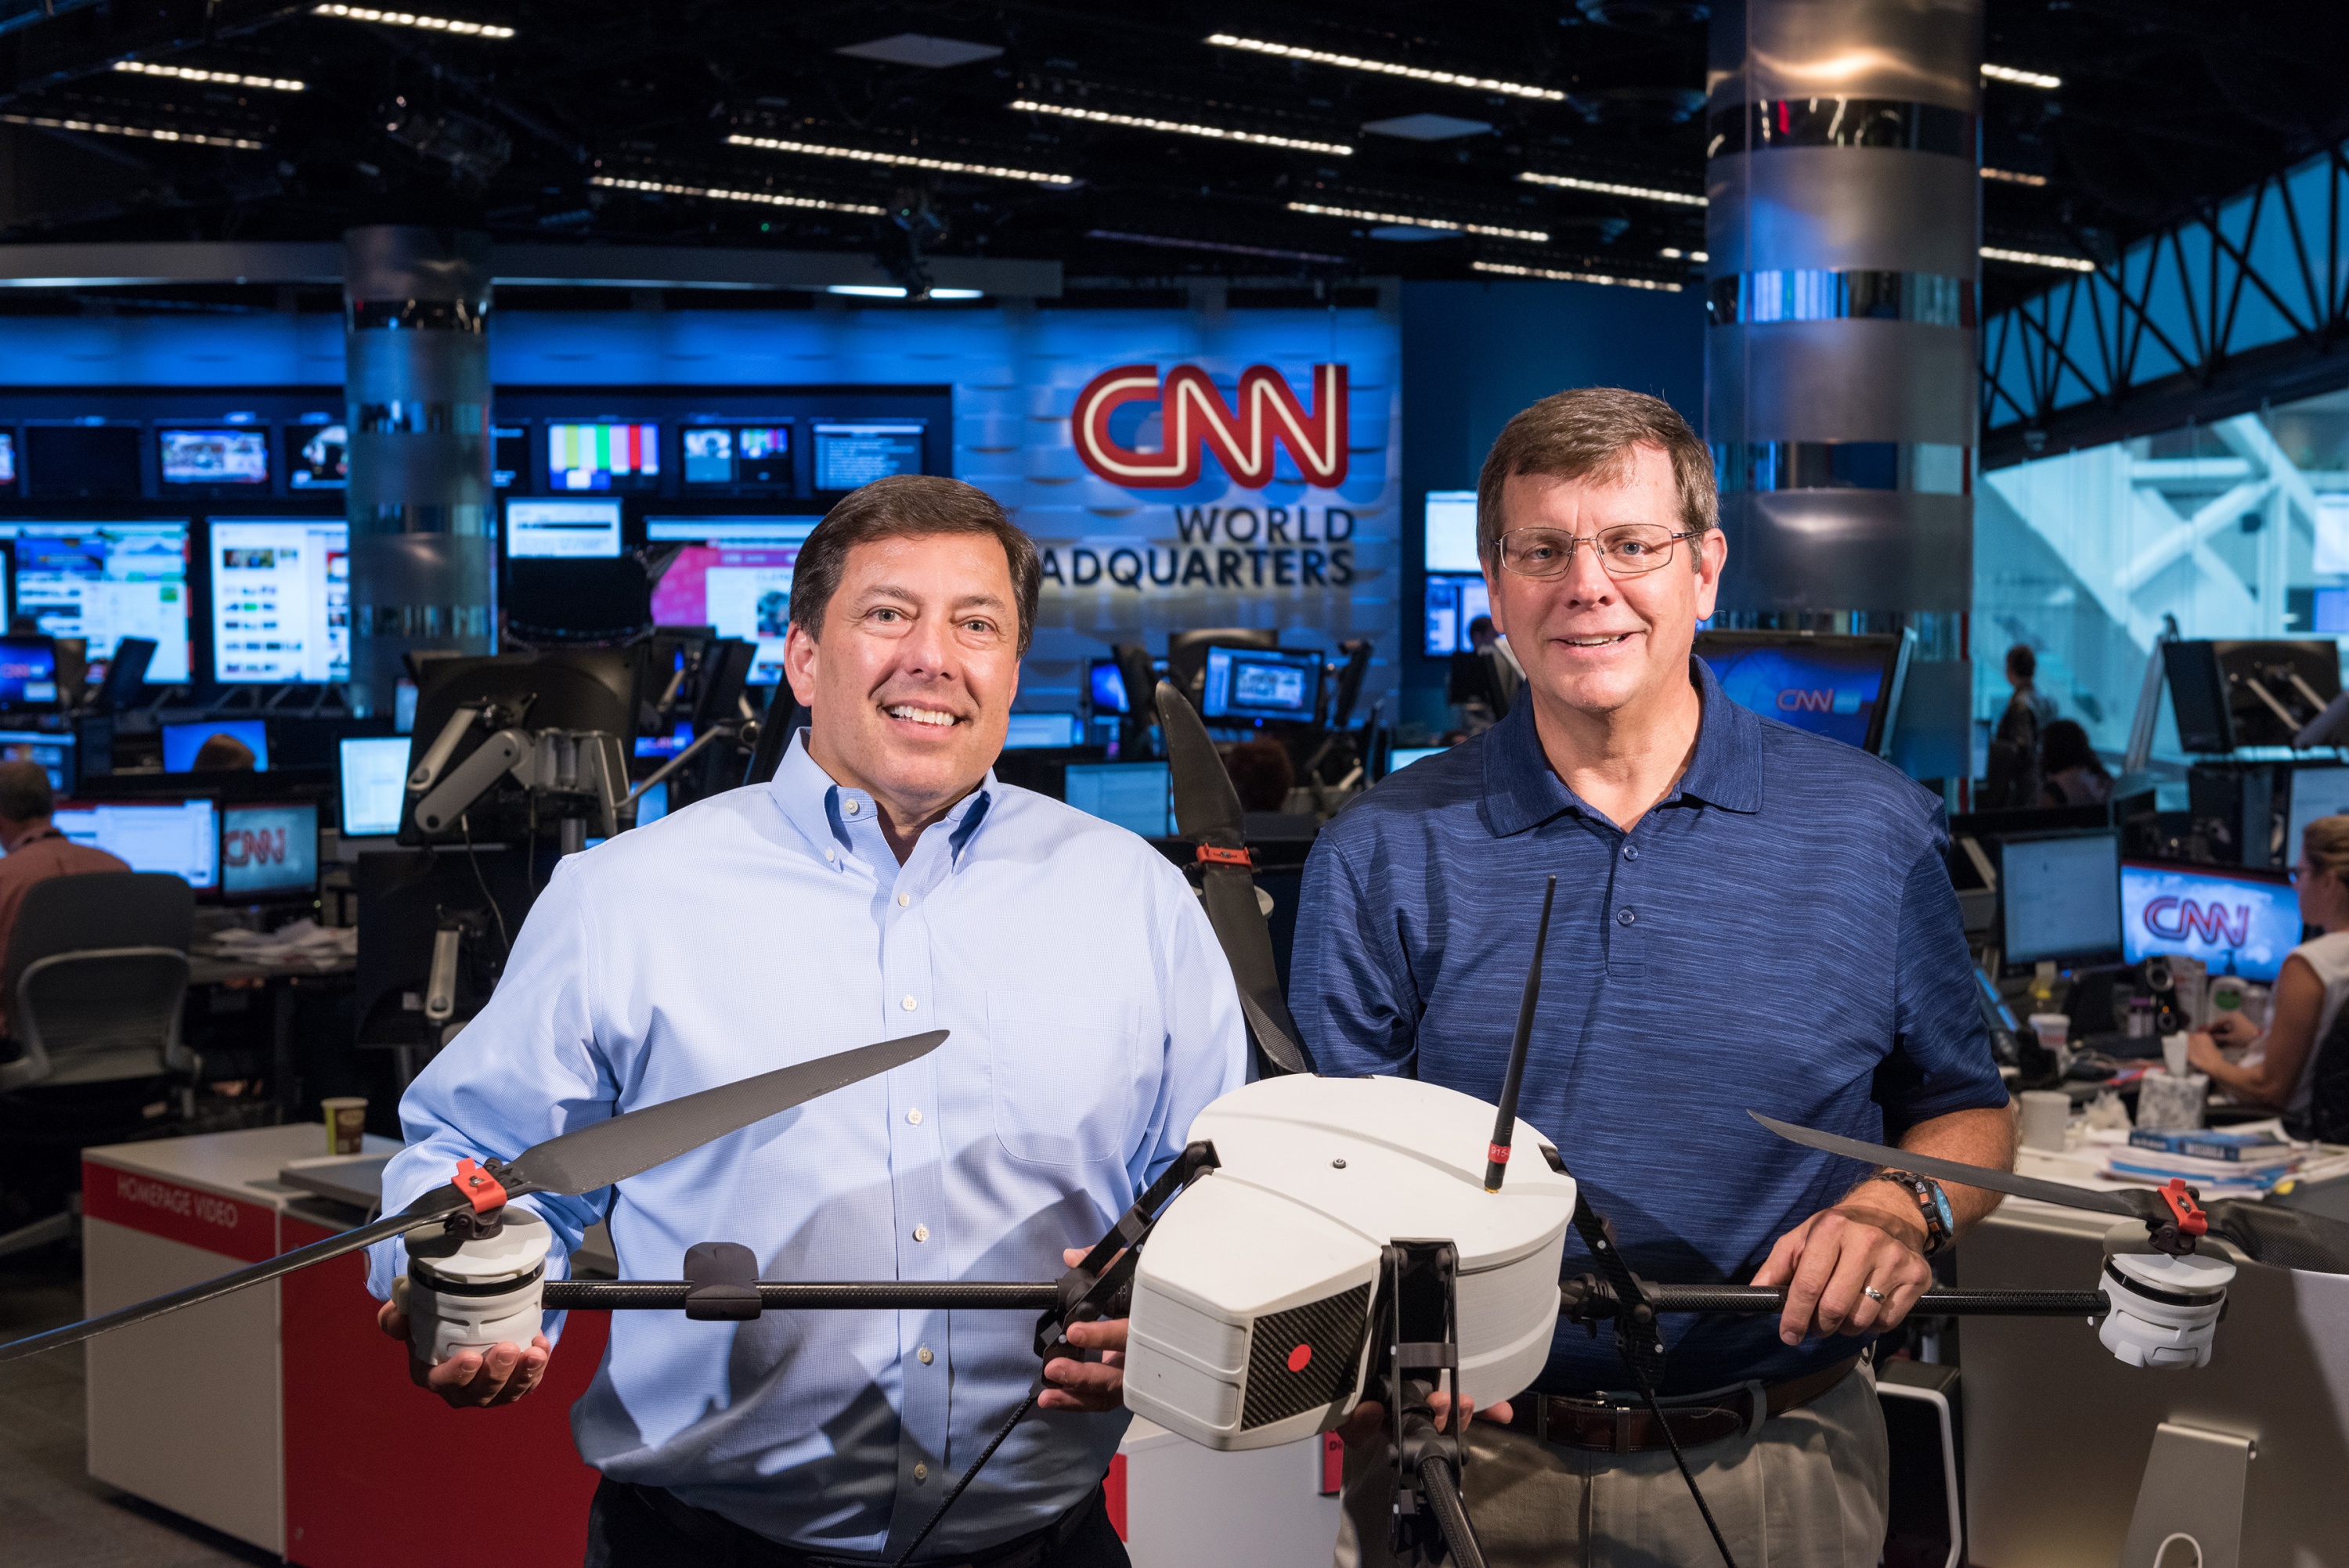 The Georgia Tech Research Institute (GTRI) and CNN have been working together to study the issues affecting the use of unmanned aerial vehicles for newsgathering. Shown in CNN’s World Headquarters are (left) Greg Agvent, senior director of news operations for CNN, and Cliff Eckert, a GTRI senior research associate who’s working on the project. They are shown with an AirRobot AR 180, one of the devices that may be suitable for newsgathering. (Credit: Rob Felt, Georgia Tech)